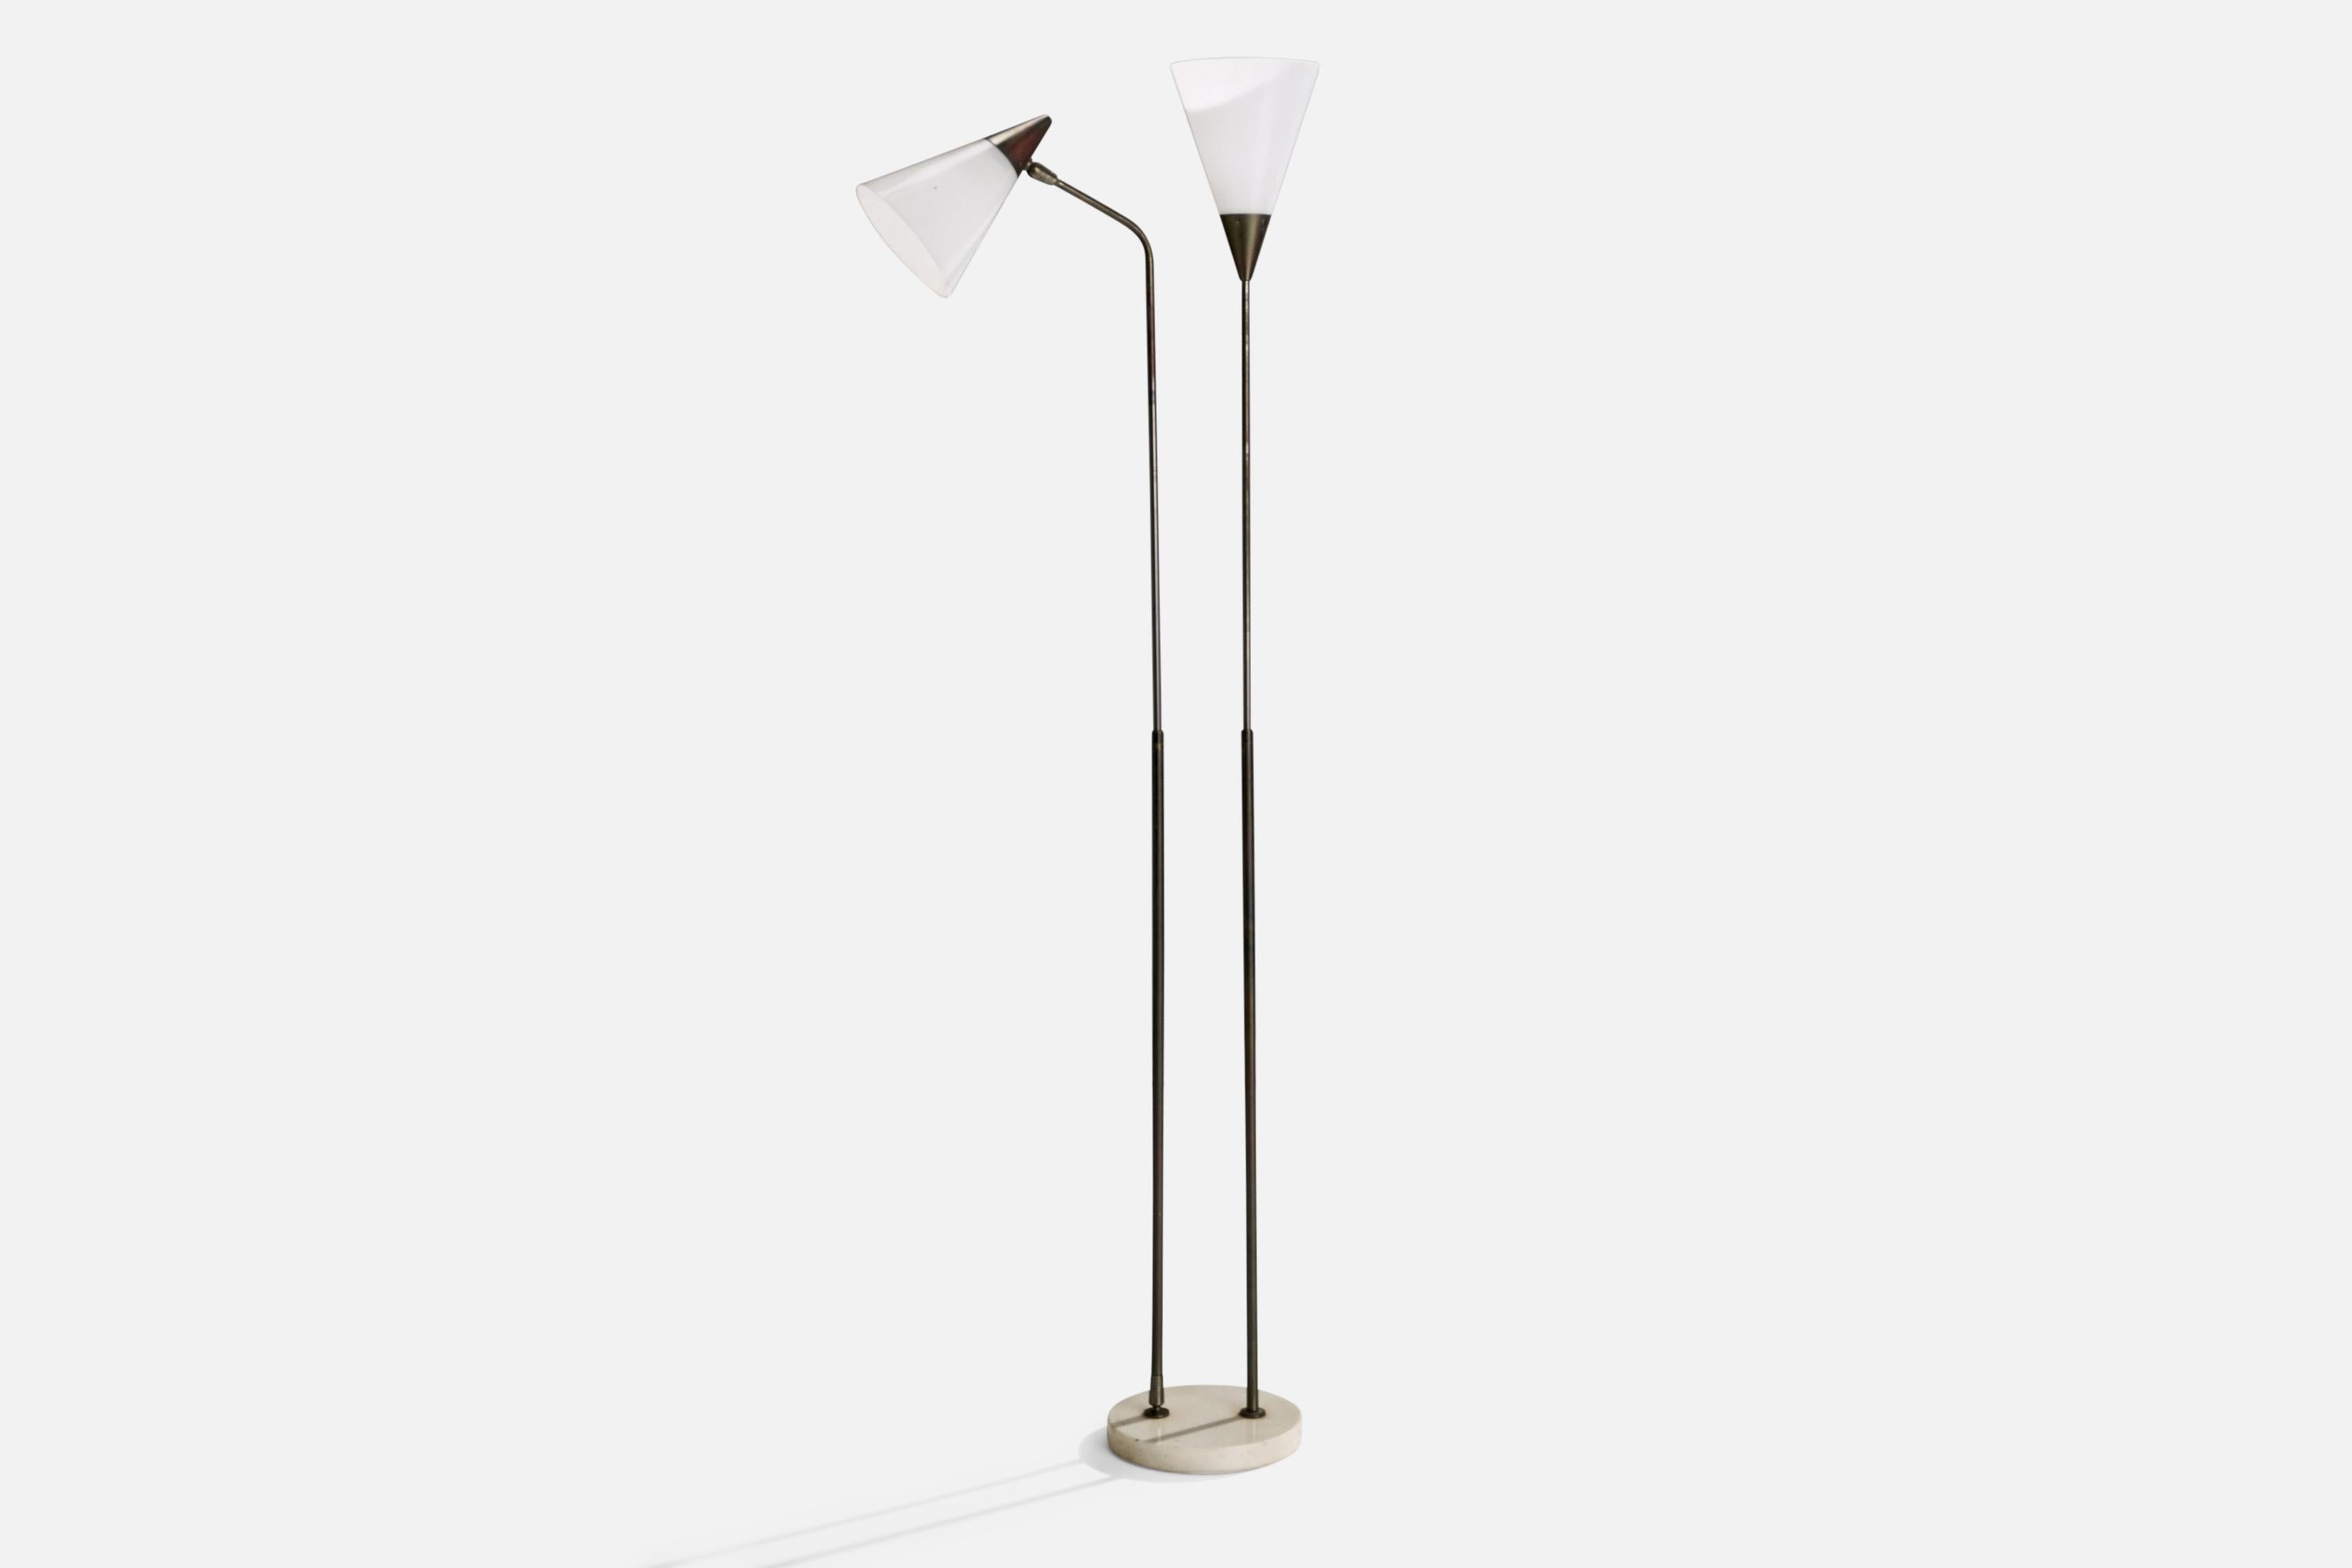 An adjustable brass, marble and acrylic floor lamp designed by Guiseppe Ostuni and produced by O-Luce, Italy, 1950s.

Overall Dimensions (inches): 76” H x 31” W x 11.5” D
Stated dimensions include shade.
Bulb Specifications: E-26 Bulb
Number of